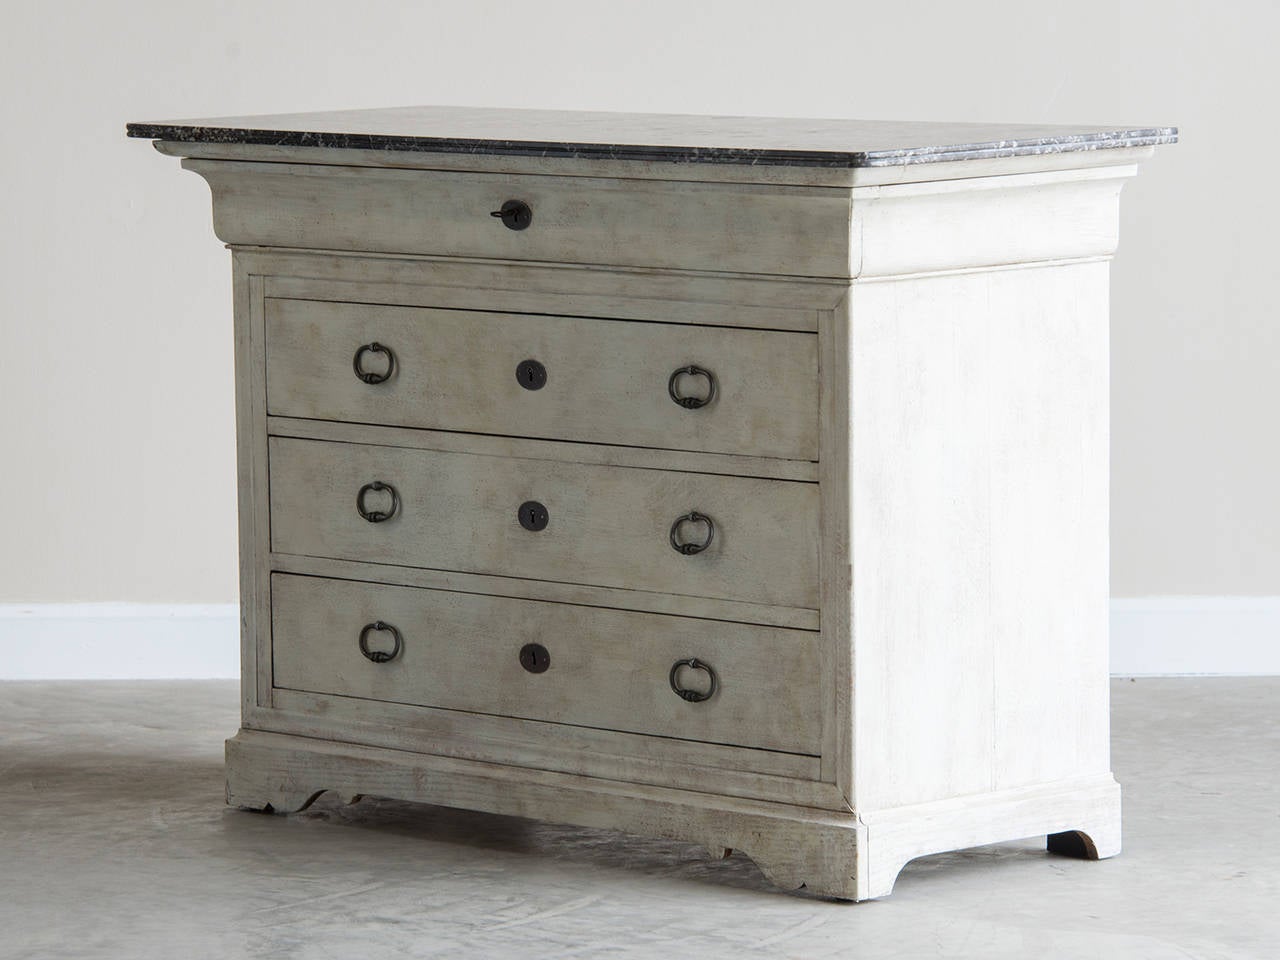 A Louis Philippe style pale oak chest of drawers from France c. 1865 with a marble top.